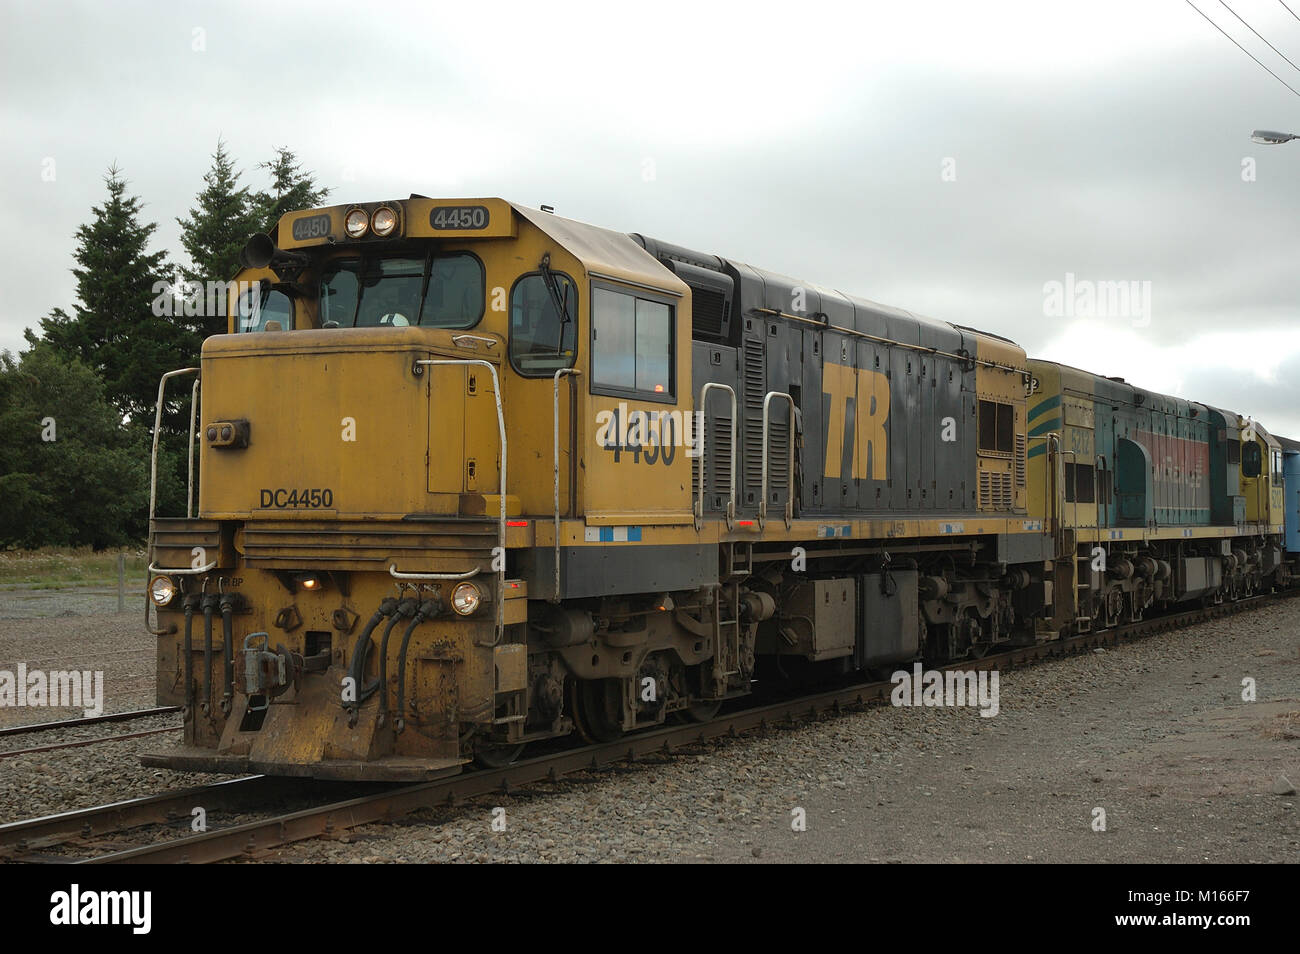 Two diesel engines that pull the TranzAlpine Train over the Southern Alps from Christchurch to Greymouth via Arthur's Pass, New Zealand. Springfield R Stock Photo